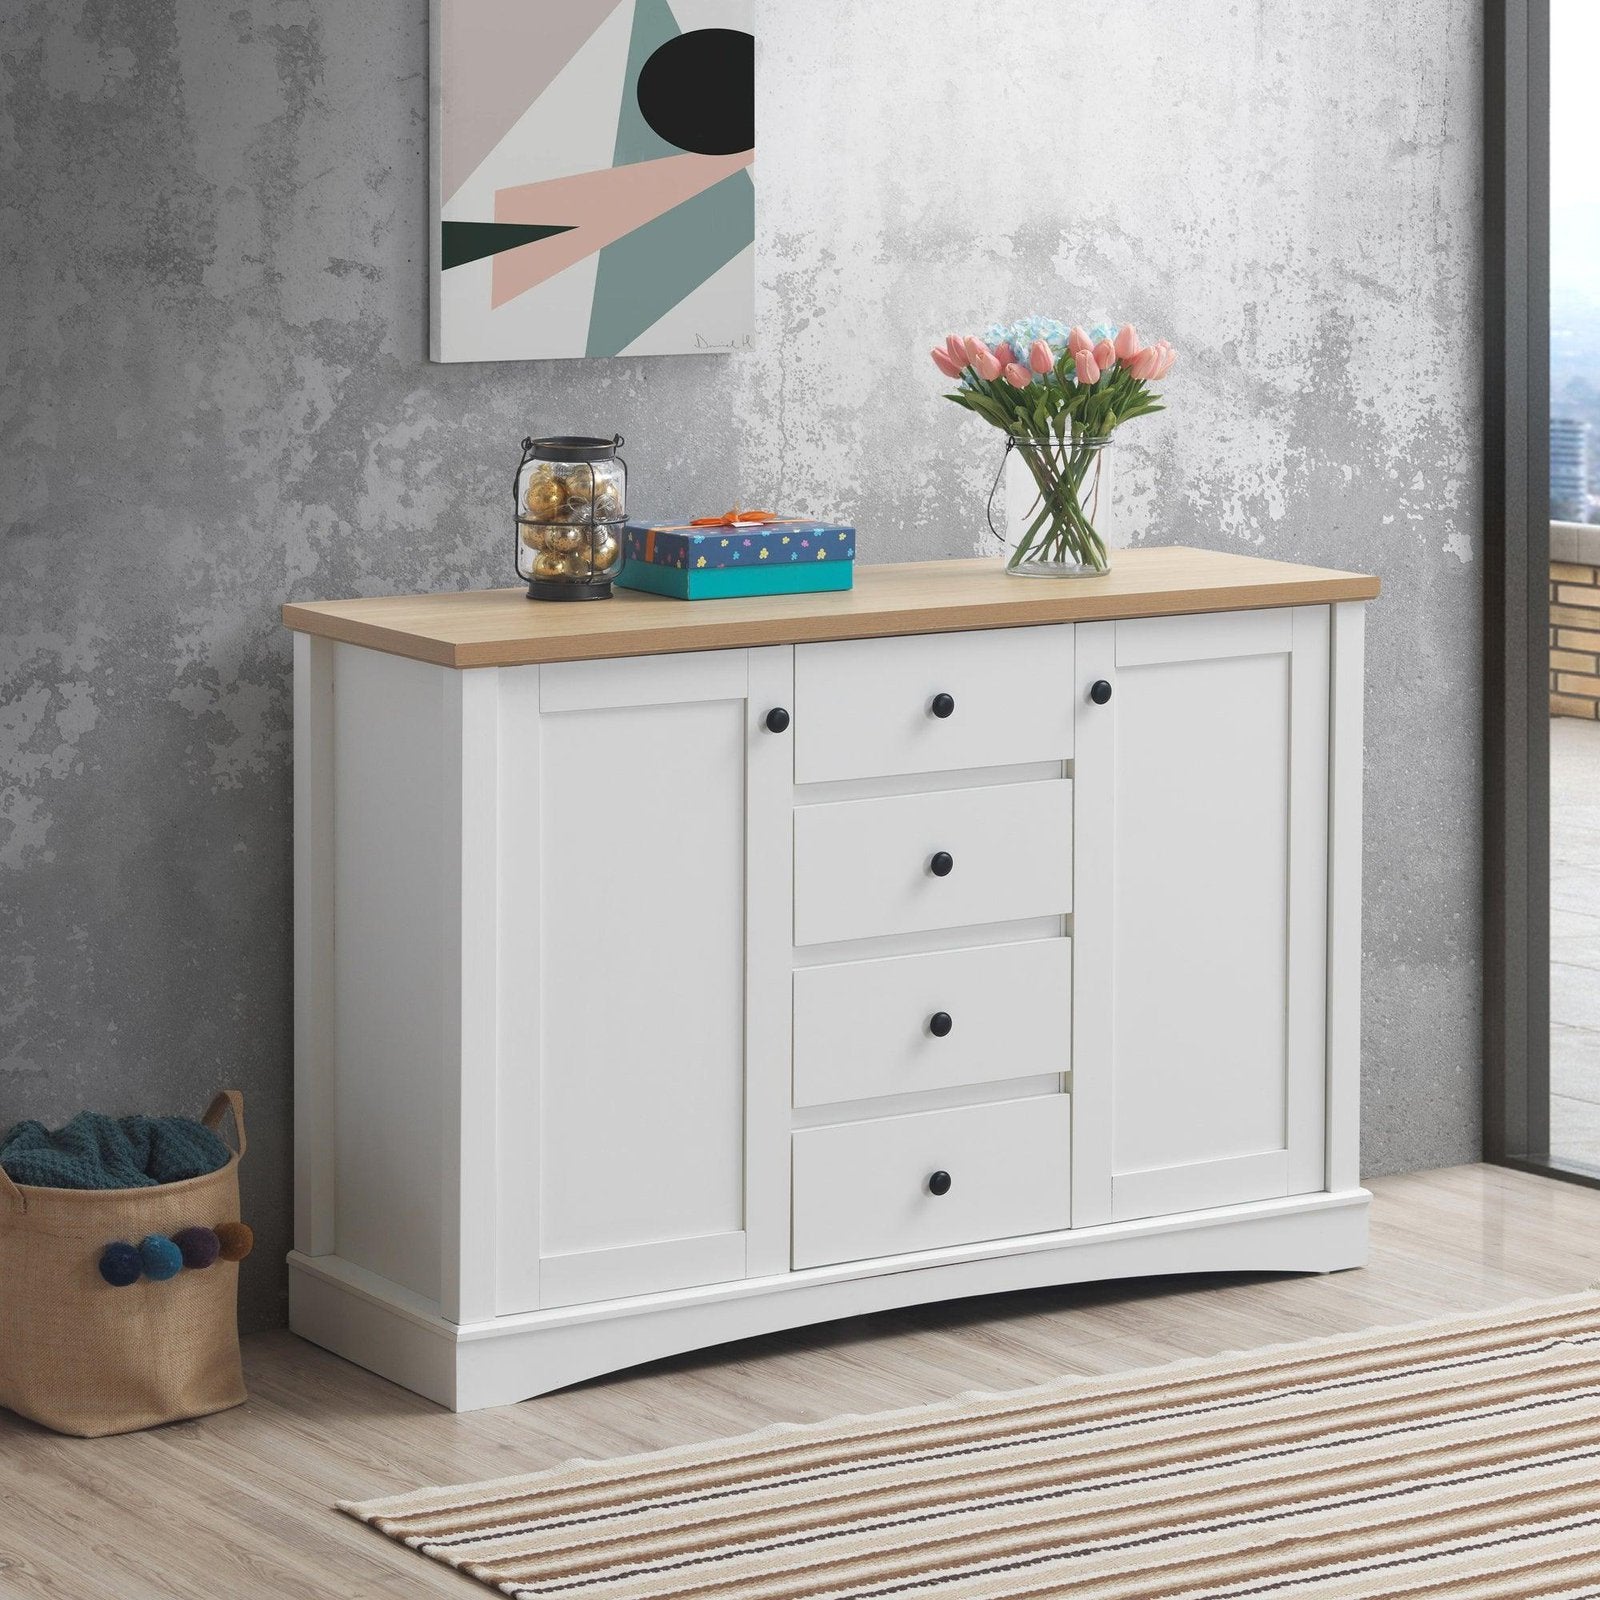 Carden British Country Style Sideboard with 2 Doors & 3 Drawers